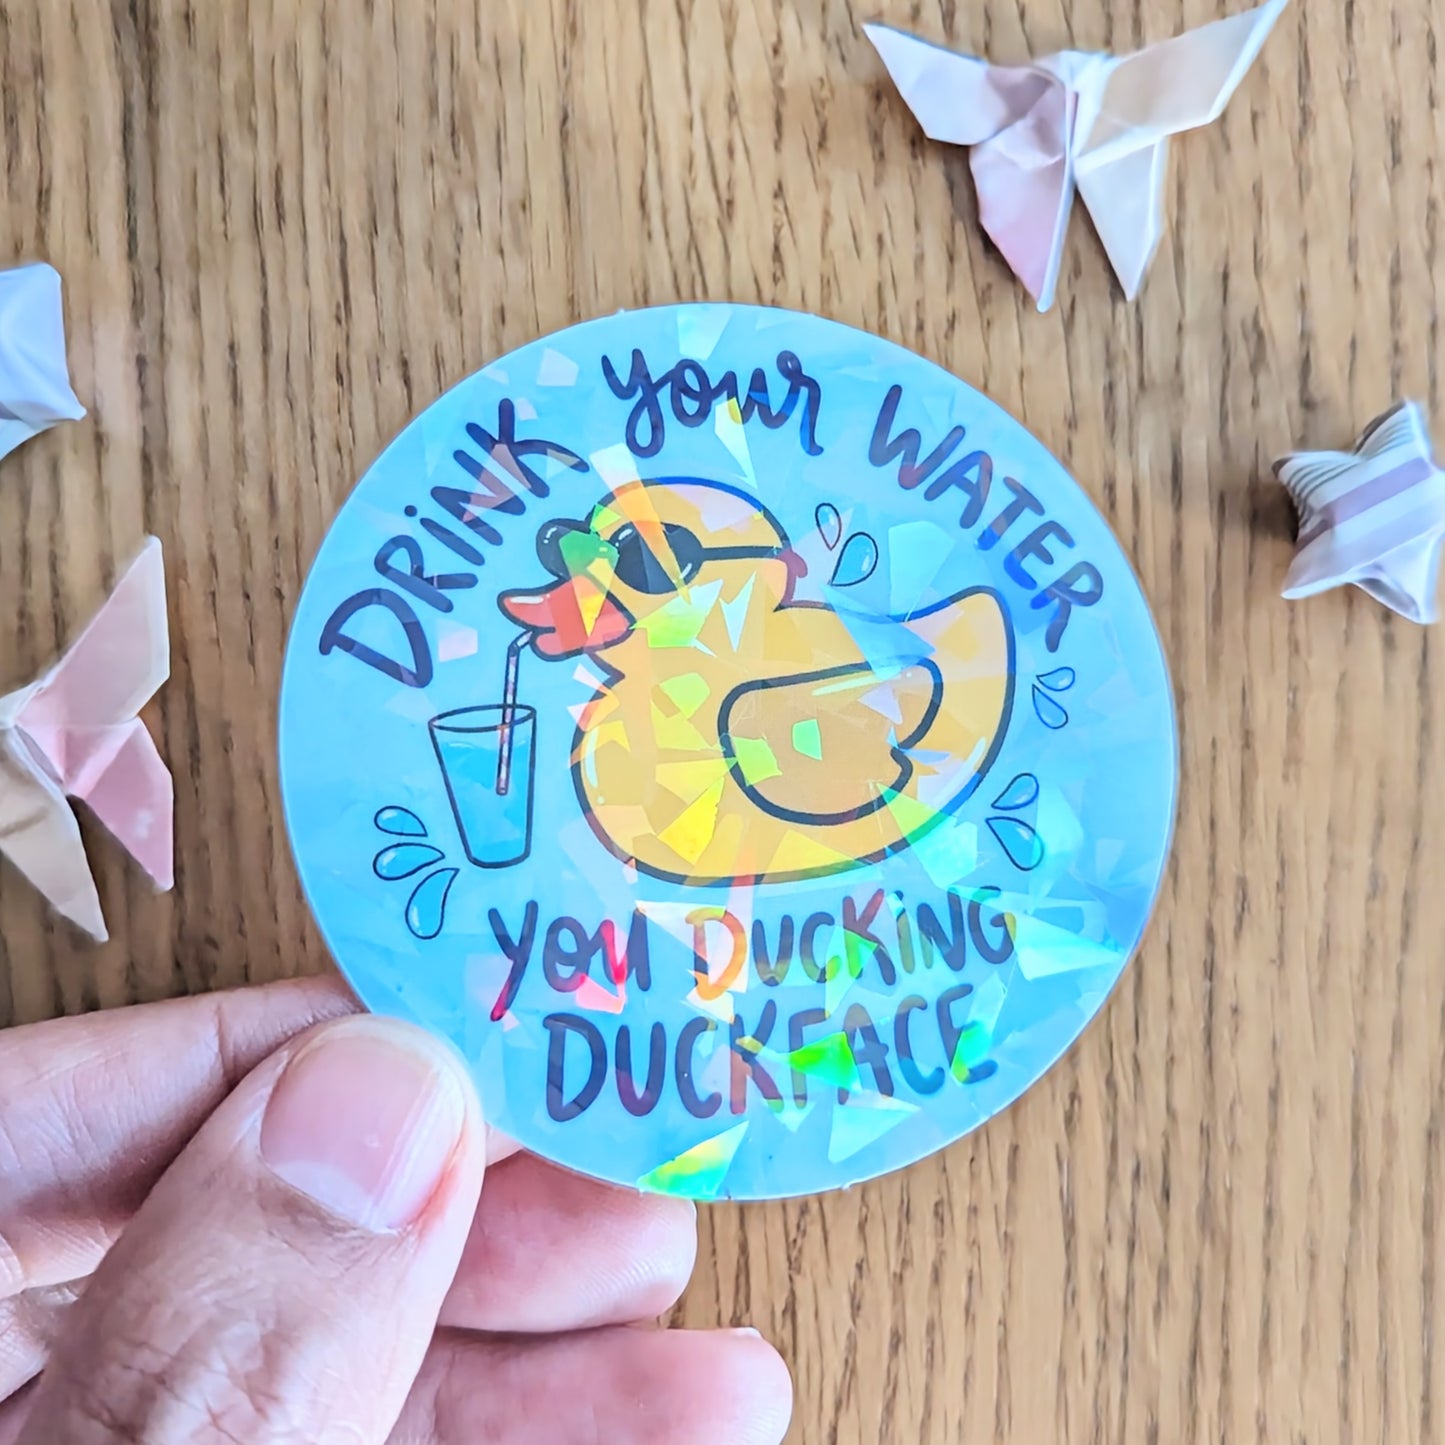 Drink Your Water You Ducking Duckface Holographic Vinyl Sticker